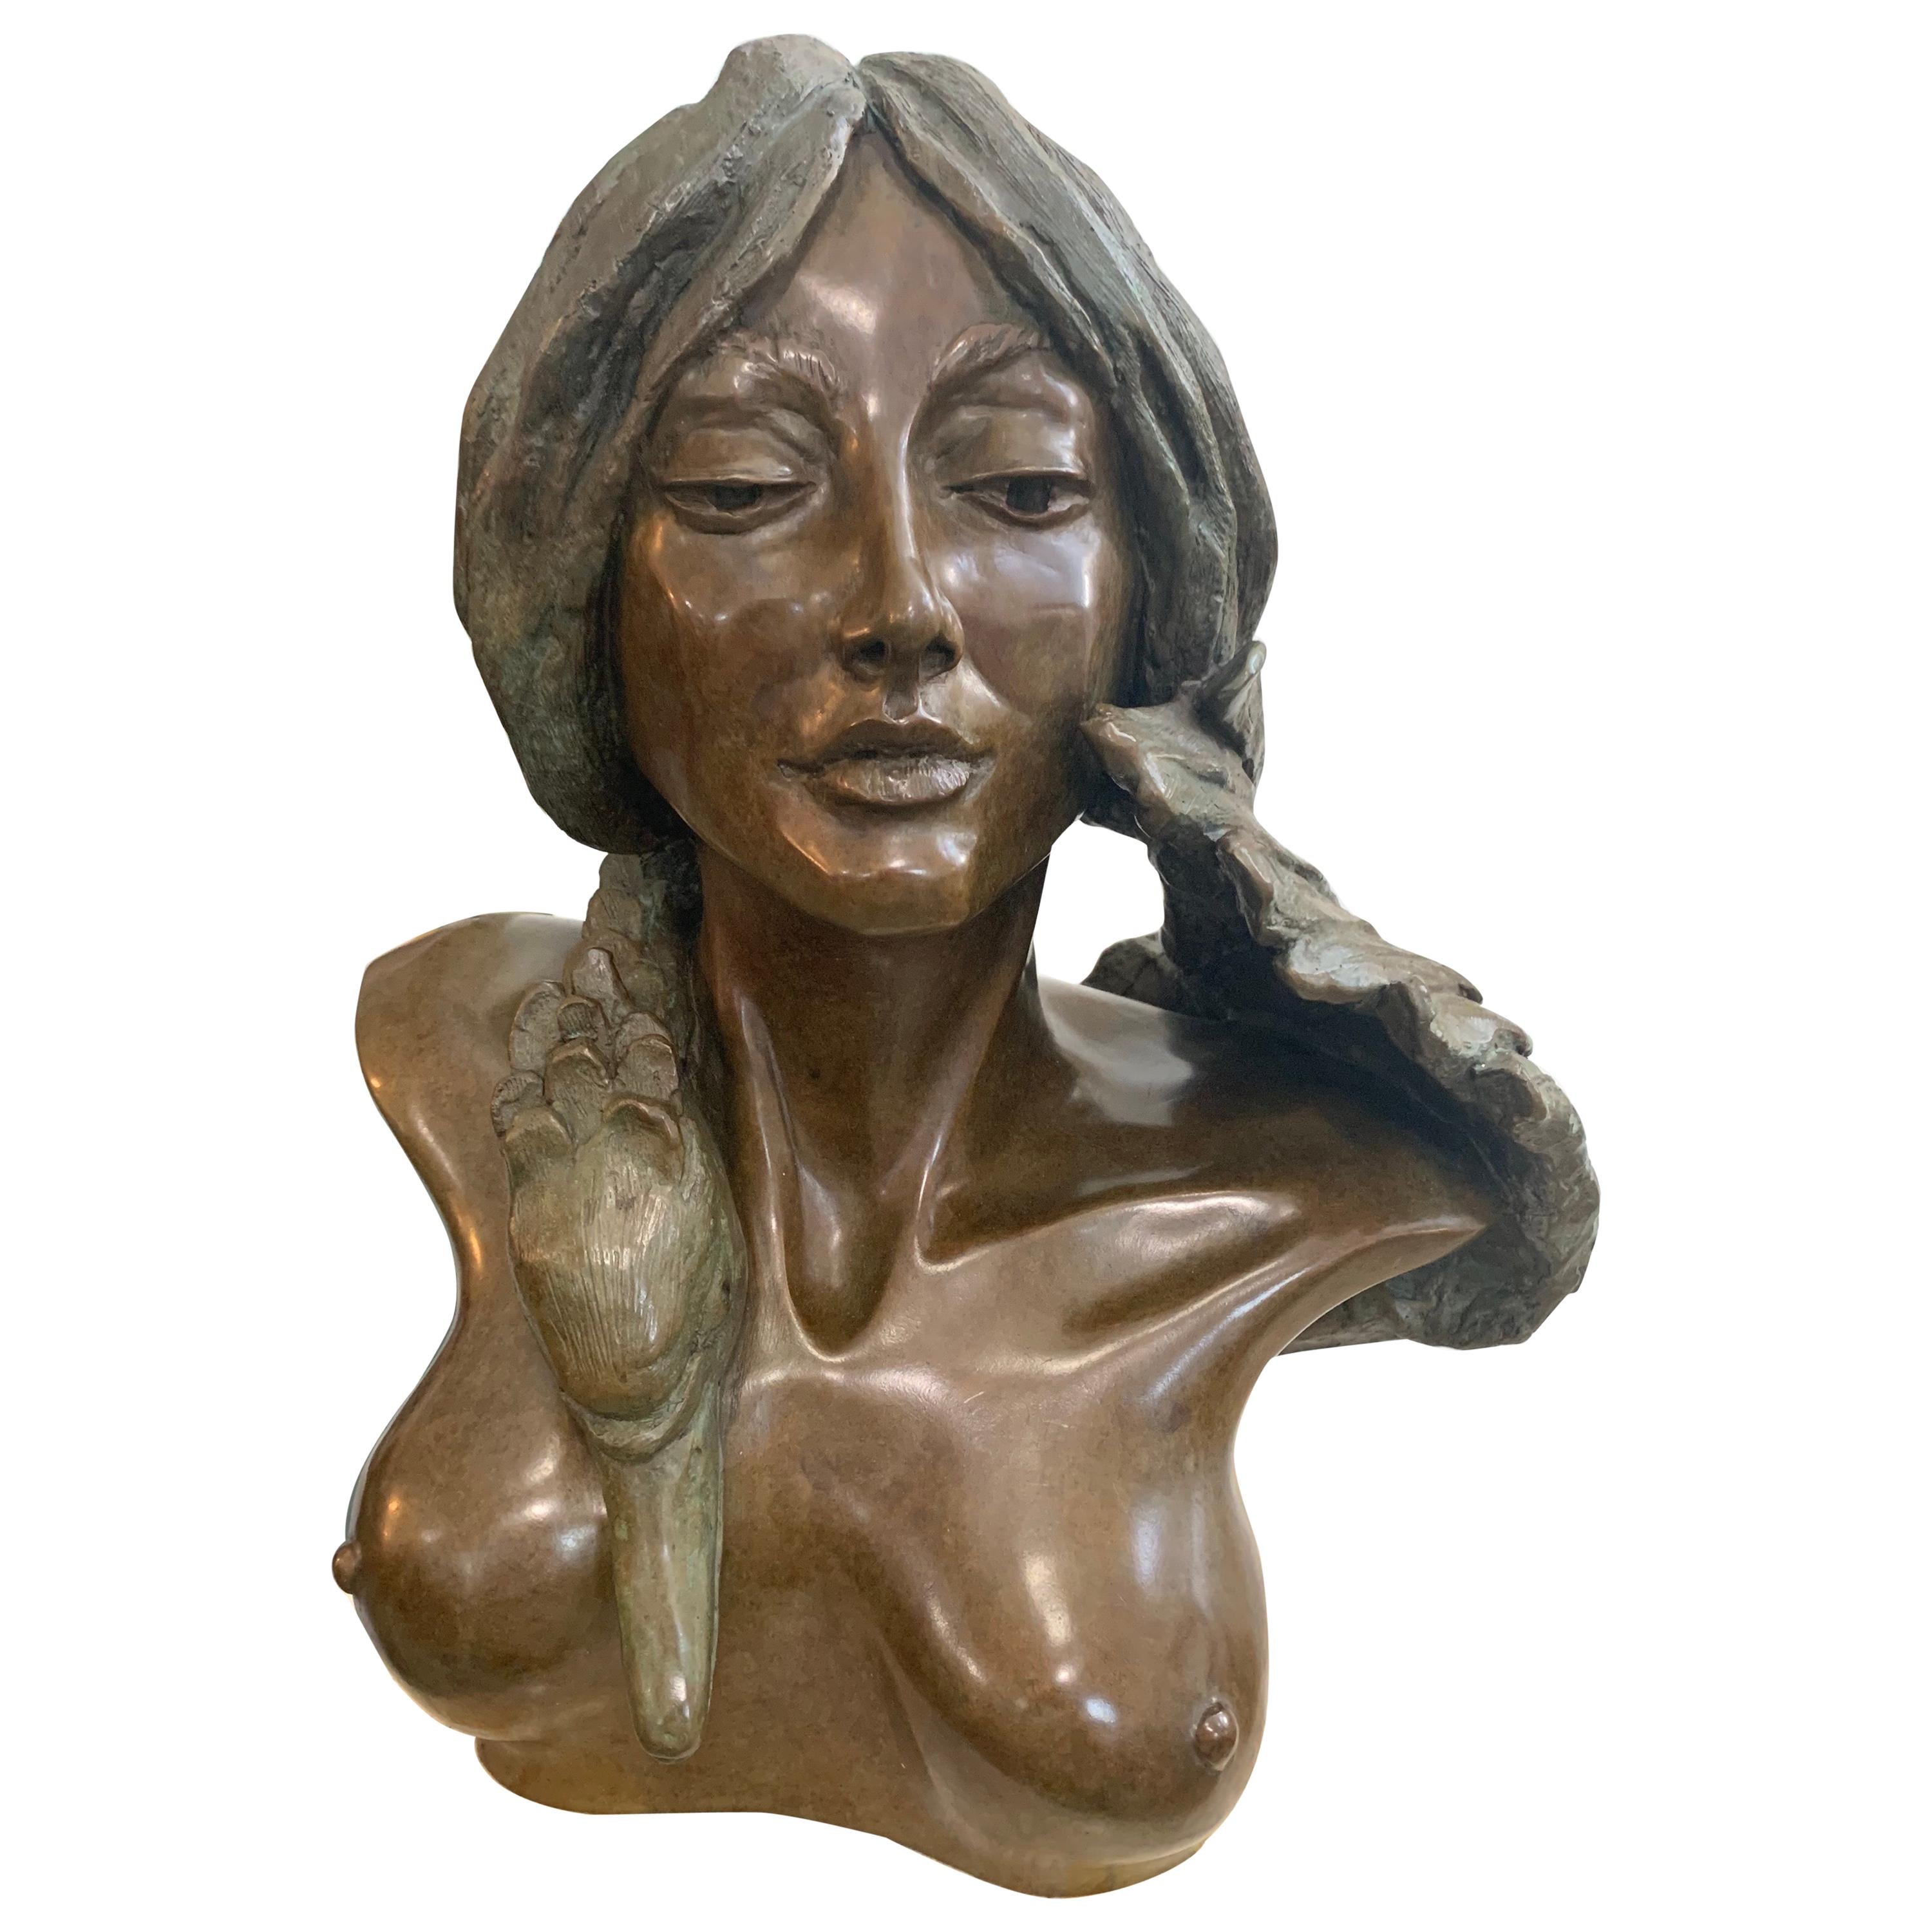 Madeline Cretella Signed and Numbered Bronze Bust of Woman with Bird